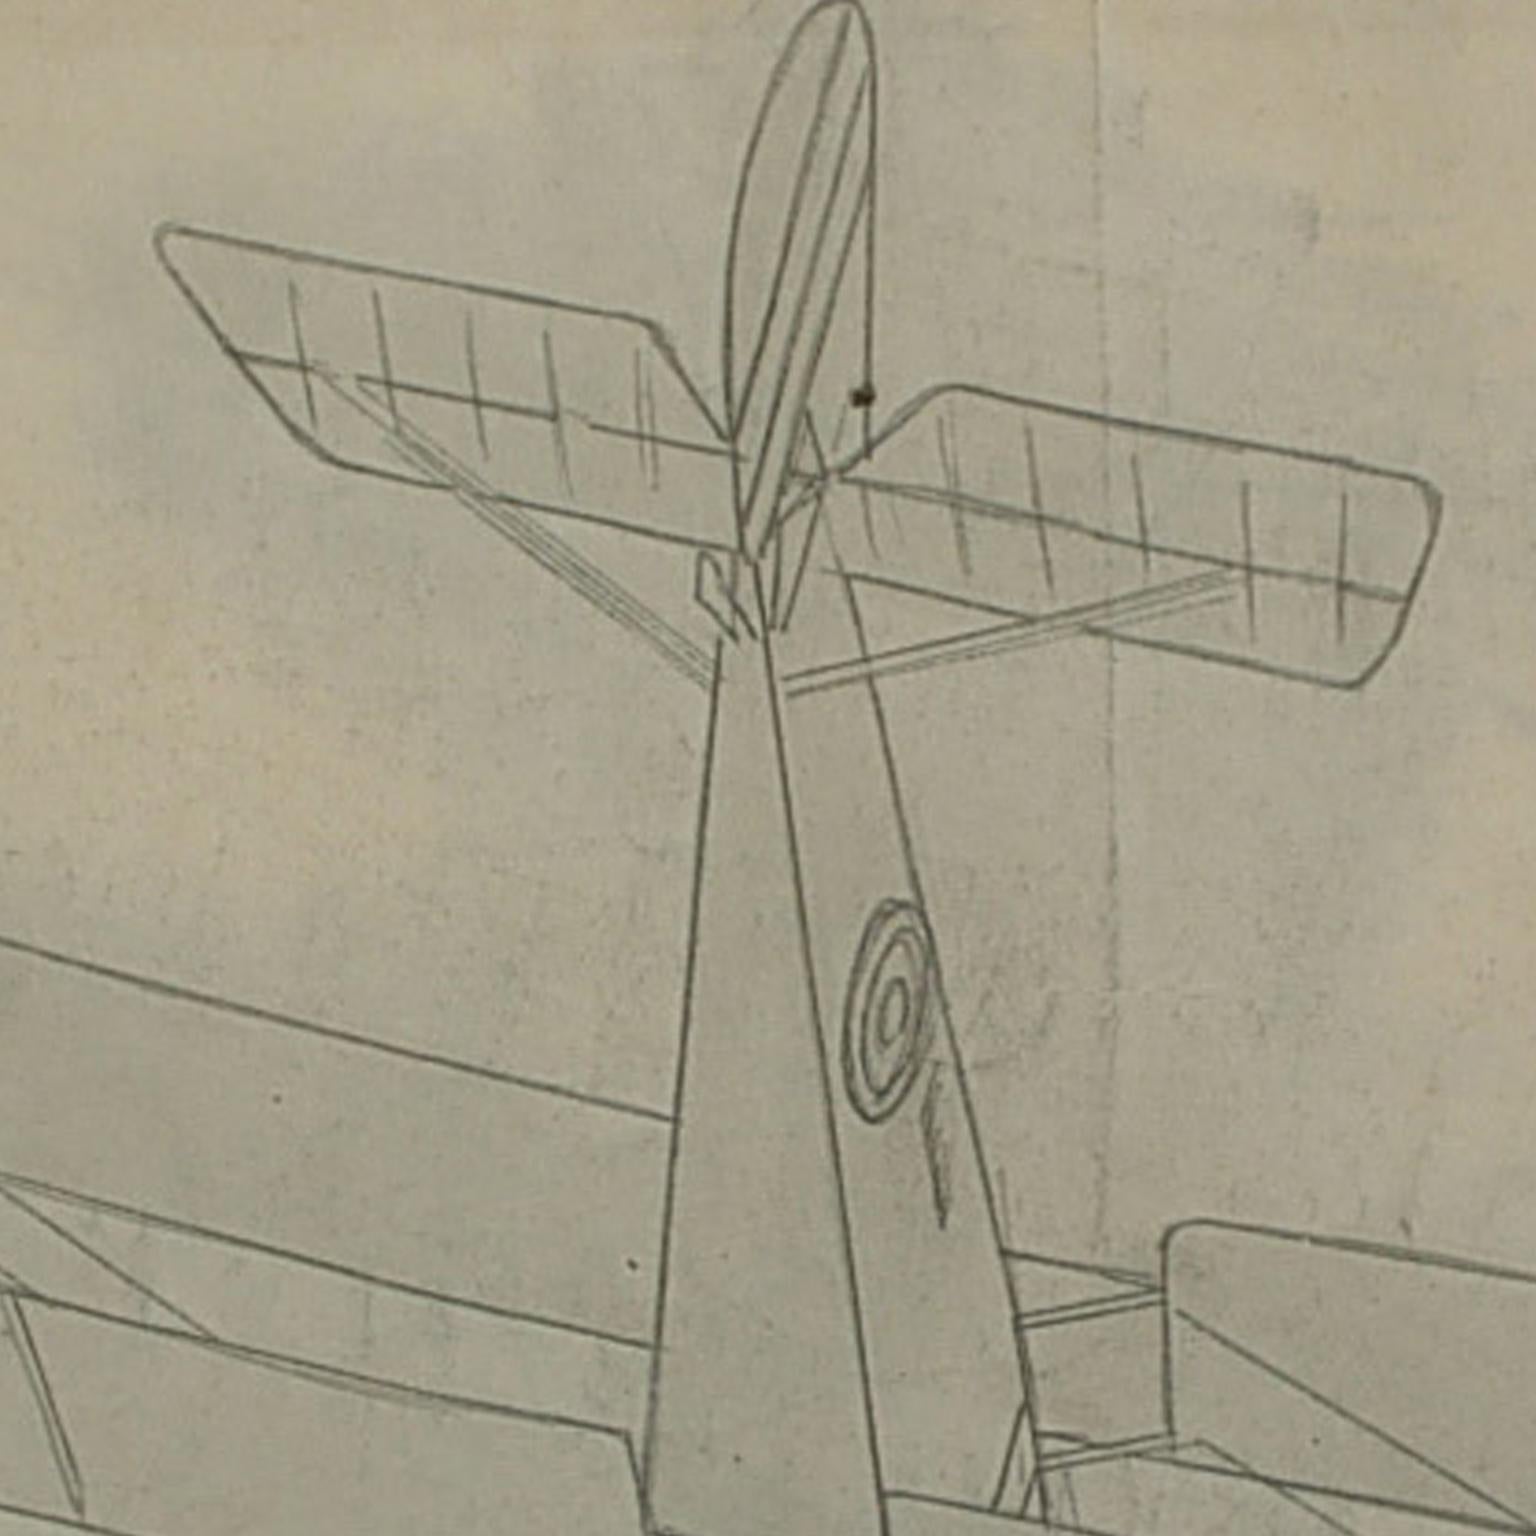 Italian Vintage Original Aviation Pencil Drawing Depicting a Hanriot HD 1 WWI Aircraft For Sale